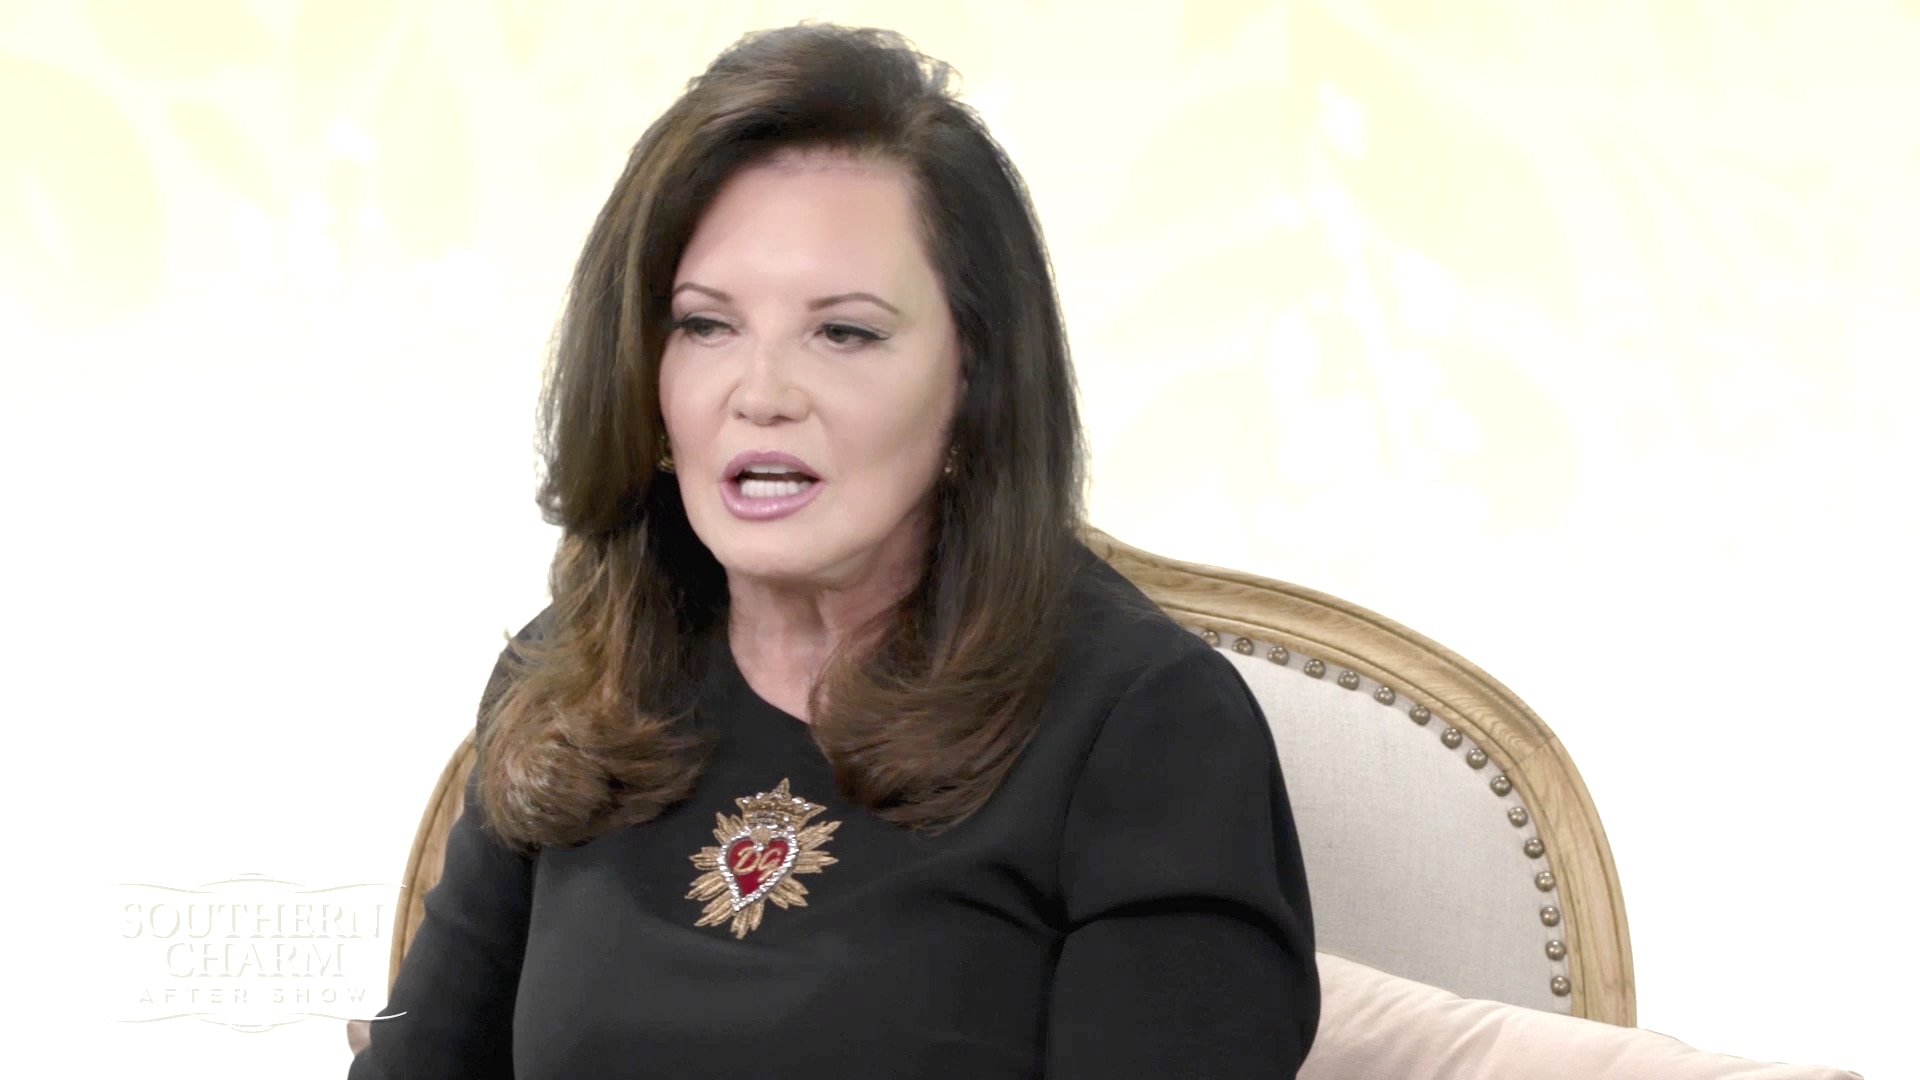 Patricia Altschul: Ashley Jacobs Is a Moron and Insane